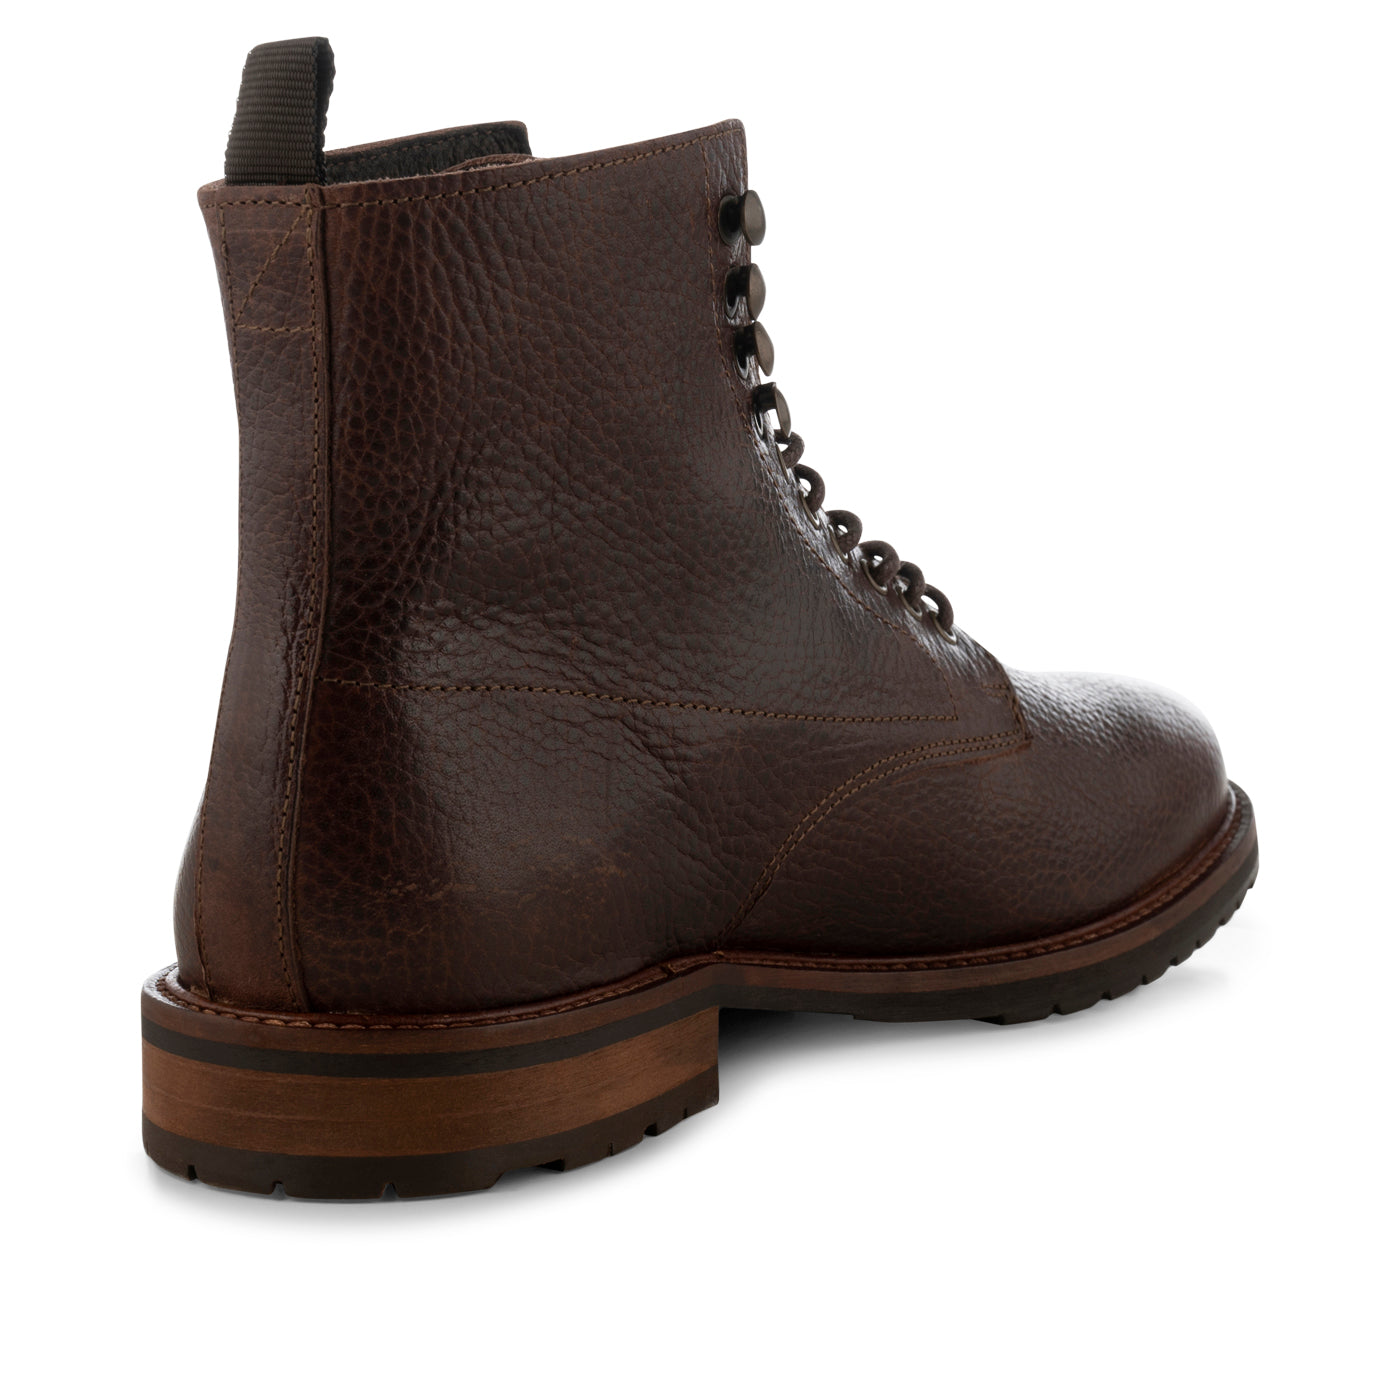 York lace up boot leather - BROWN – SHOE THE BEAR - US